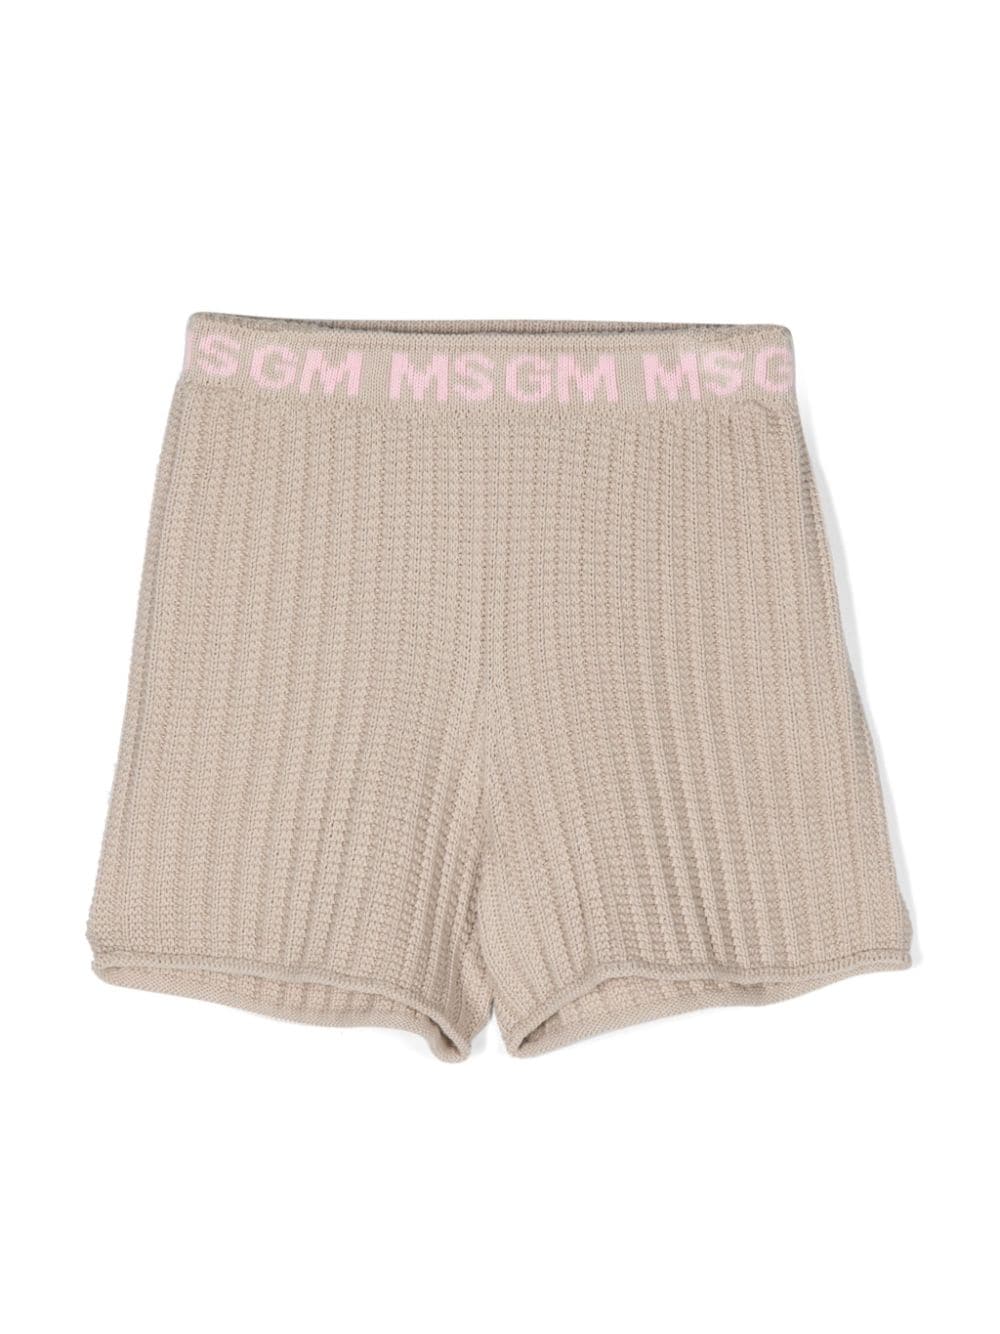 Msgm Kids' Knitted Cotton Shorts In Neutrals